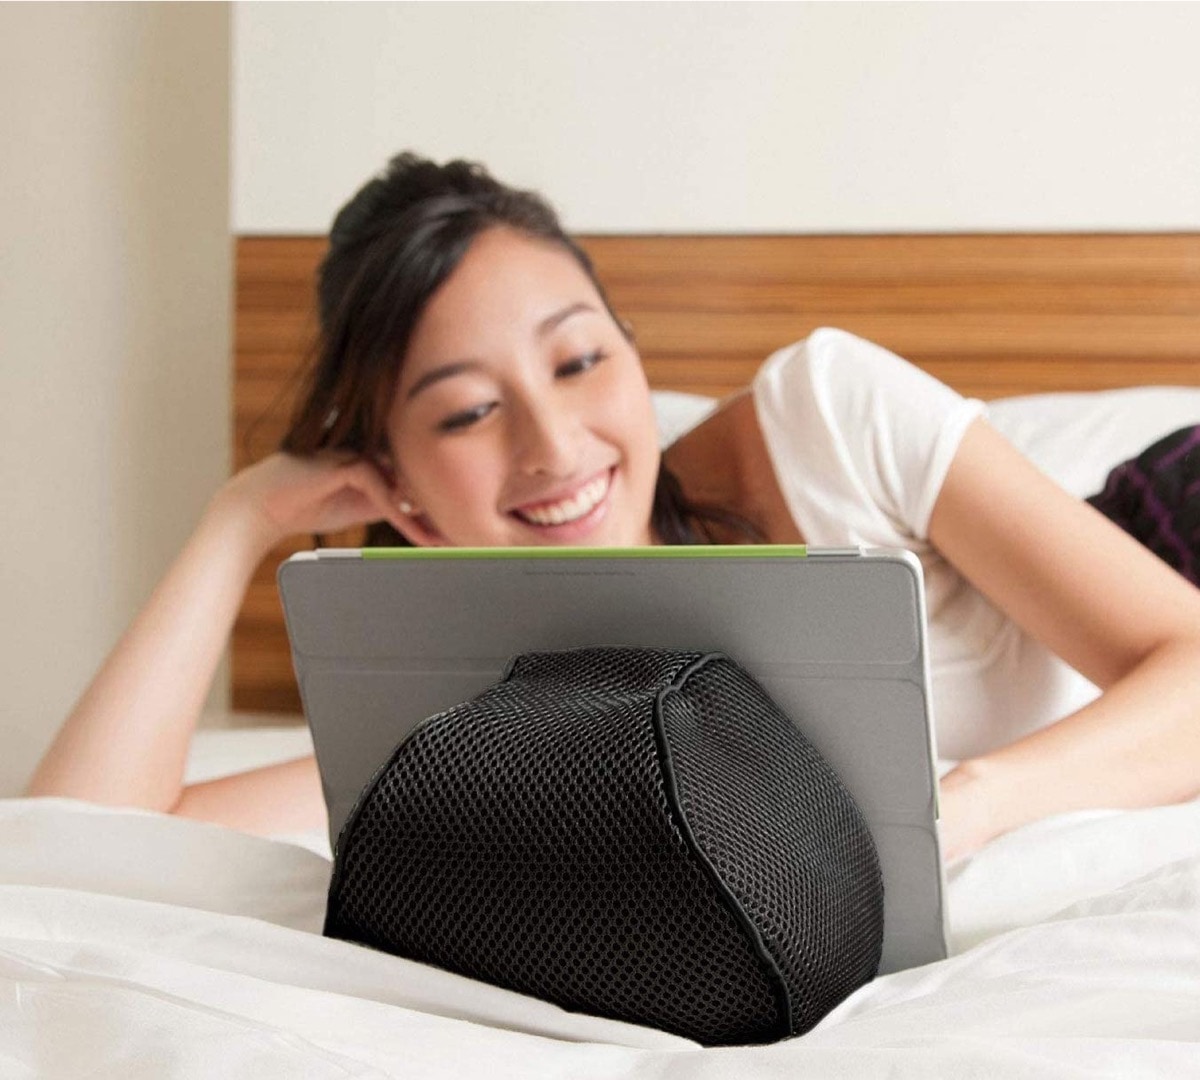 Bean bag holder for tablets and e-readers - hands-free reading